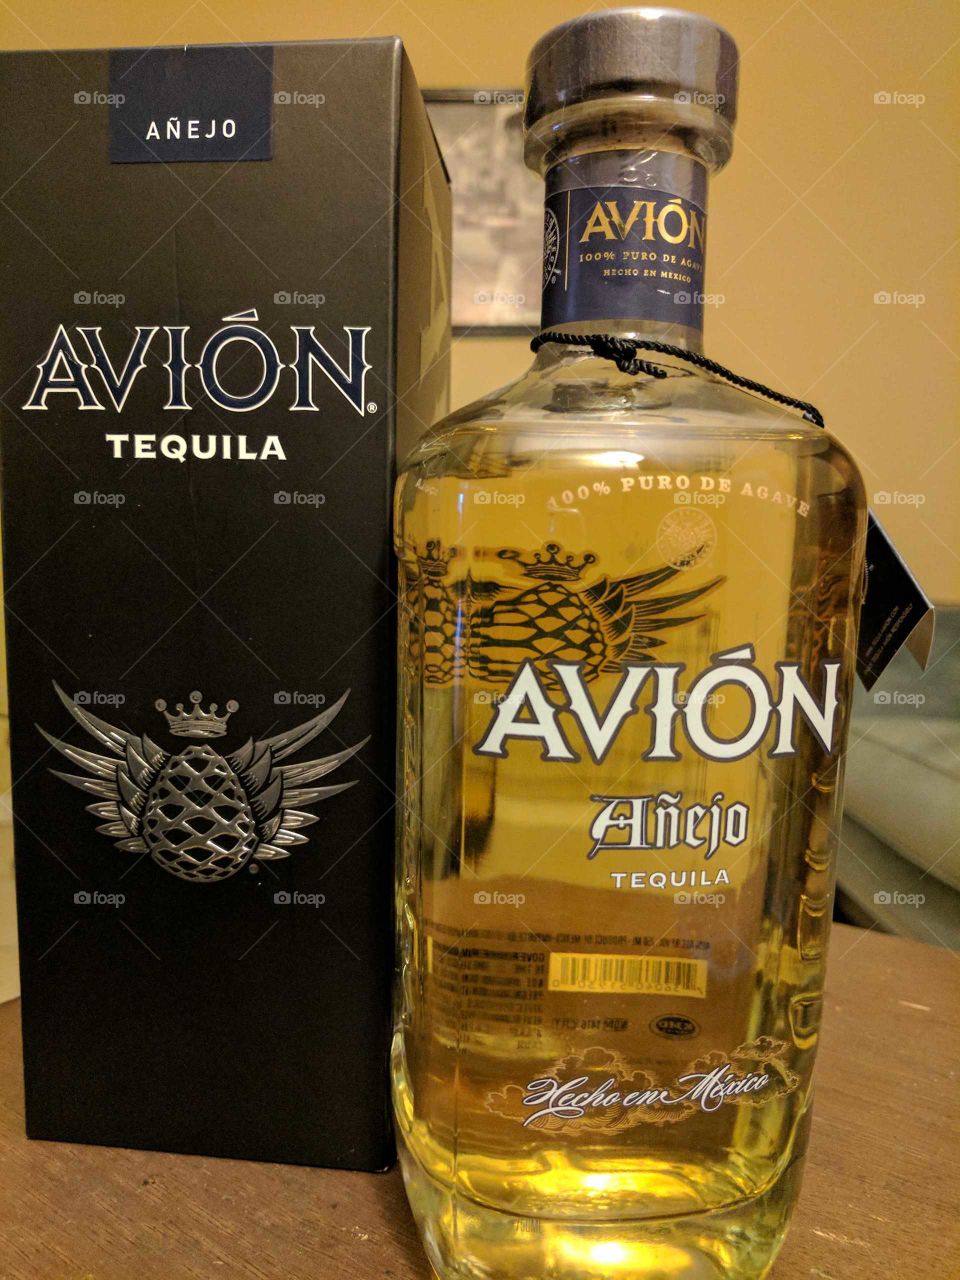 my favorite tequila